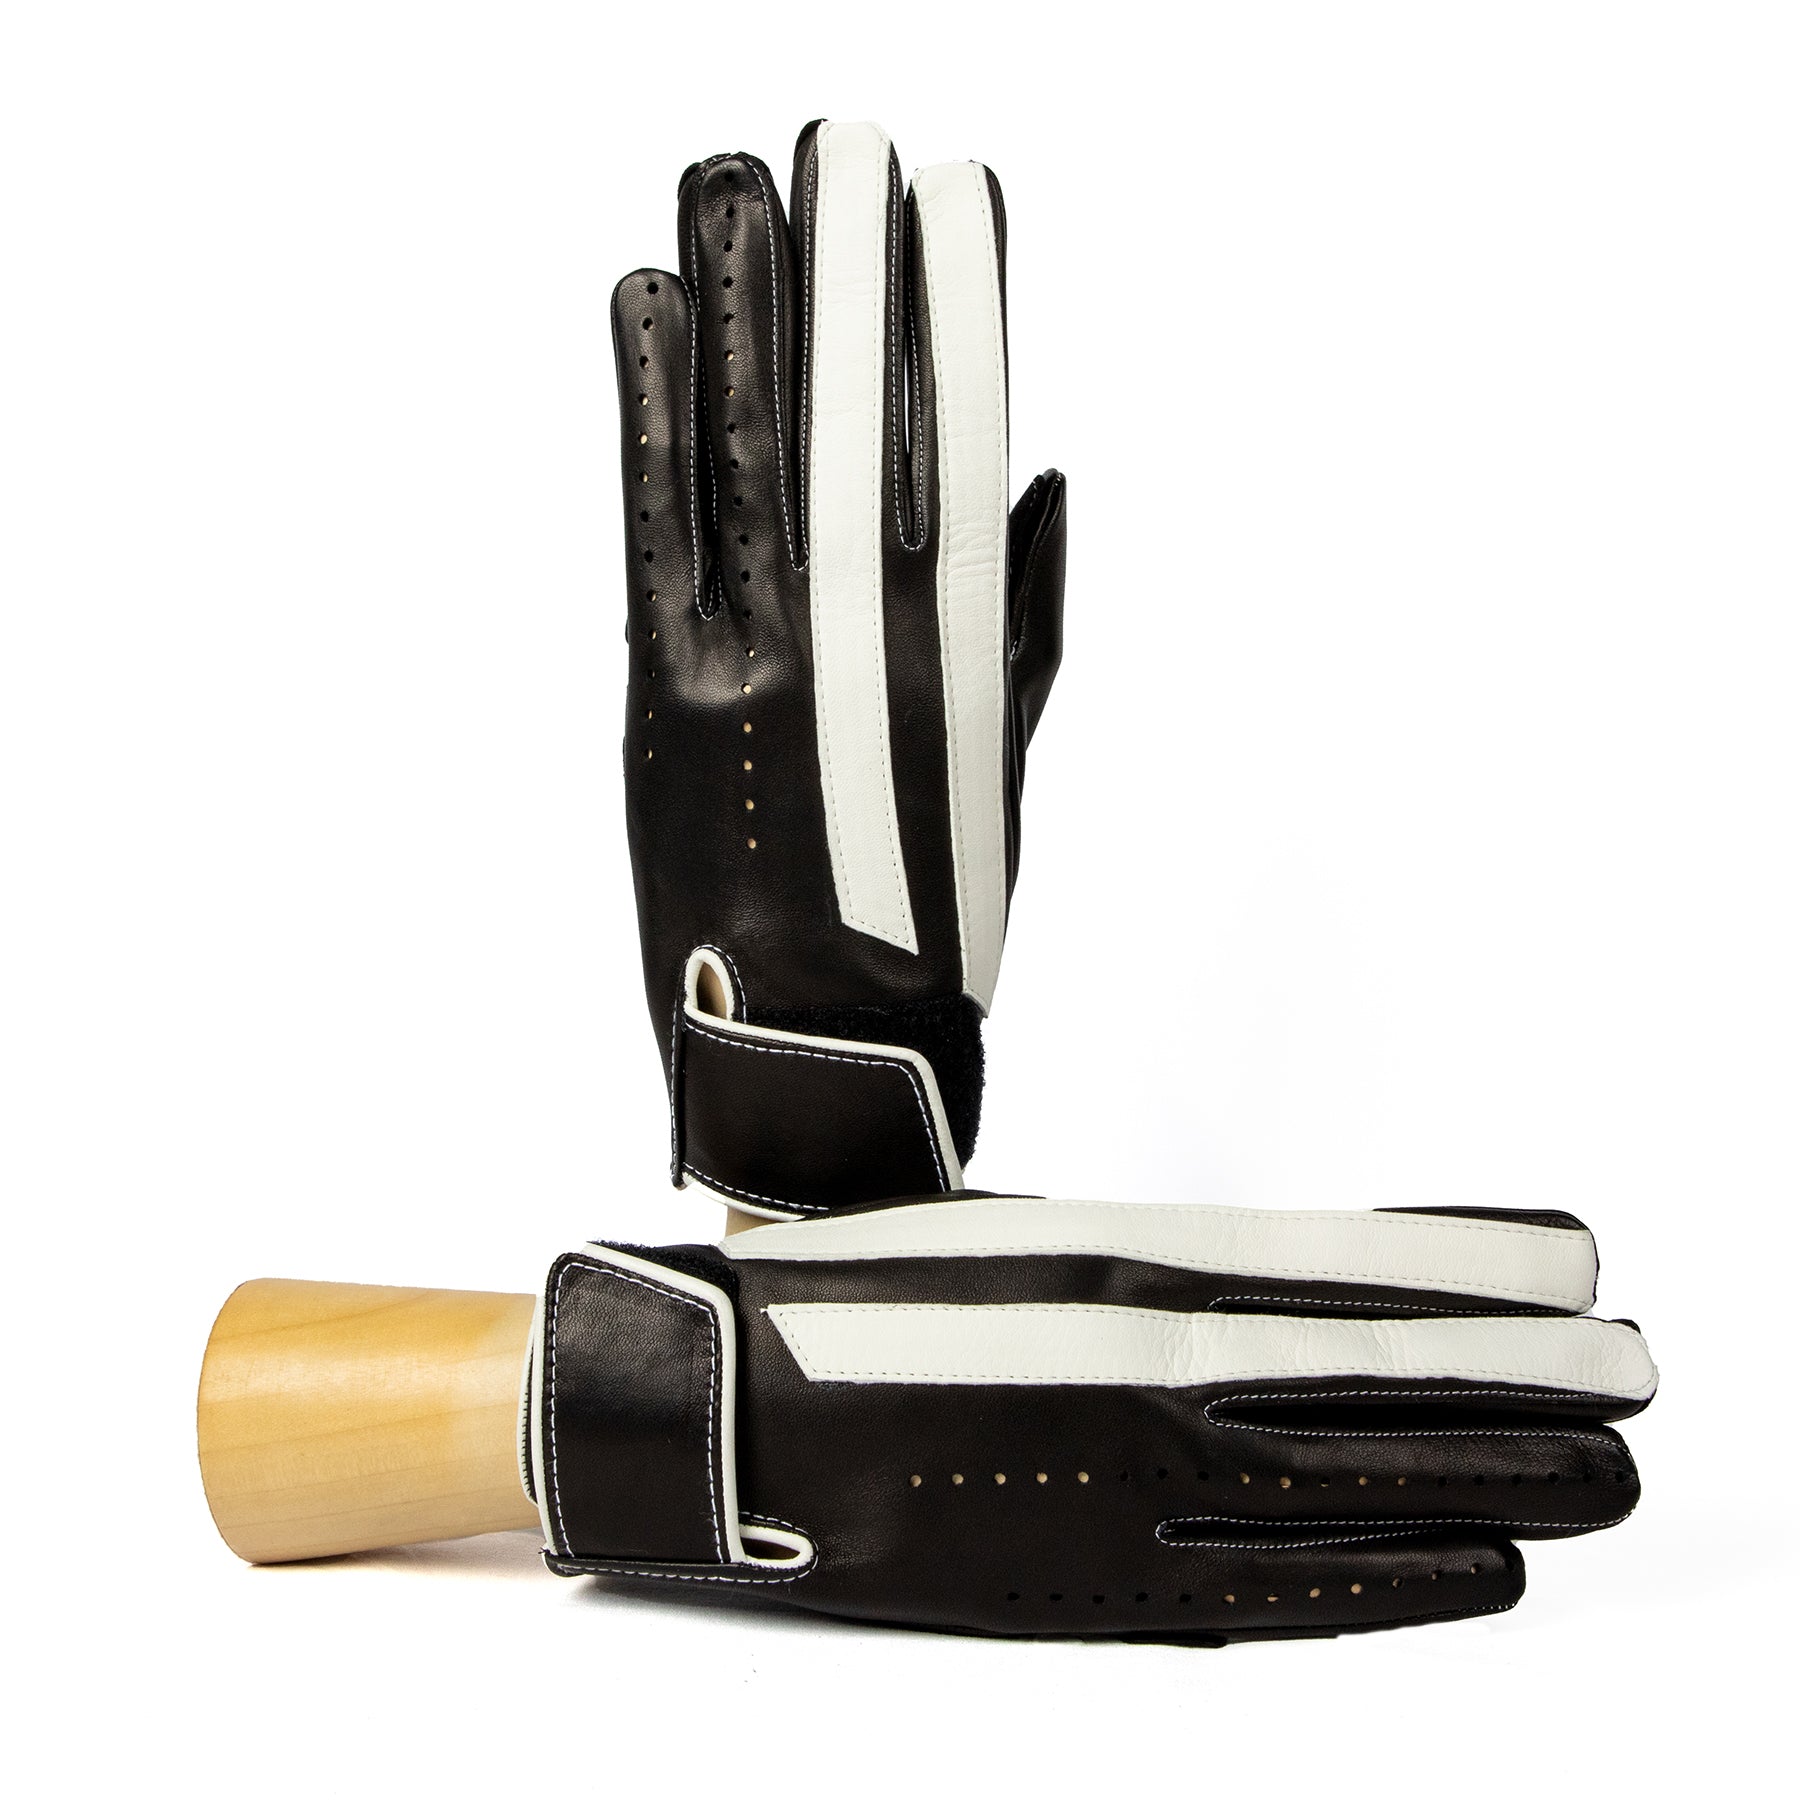 Men's unlined driving gloves in black nappa leather with white leather strips